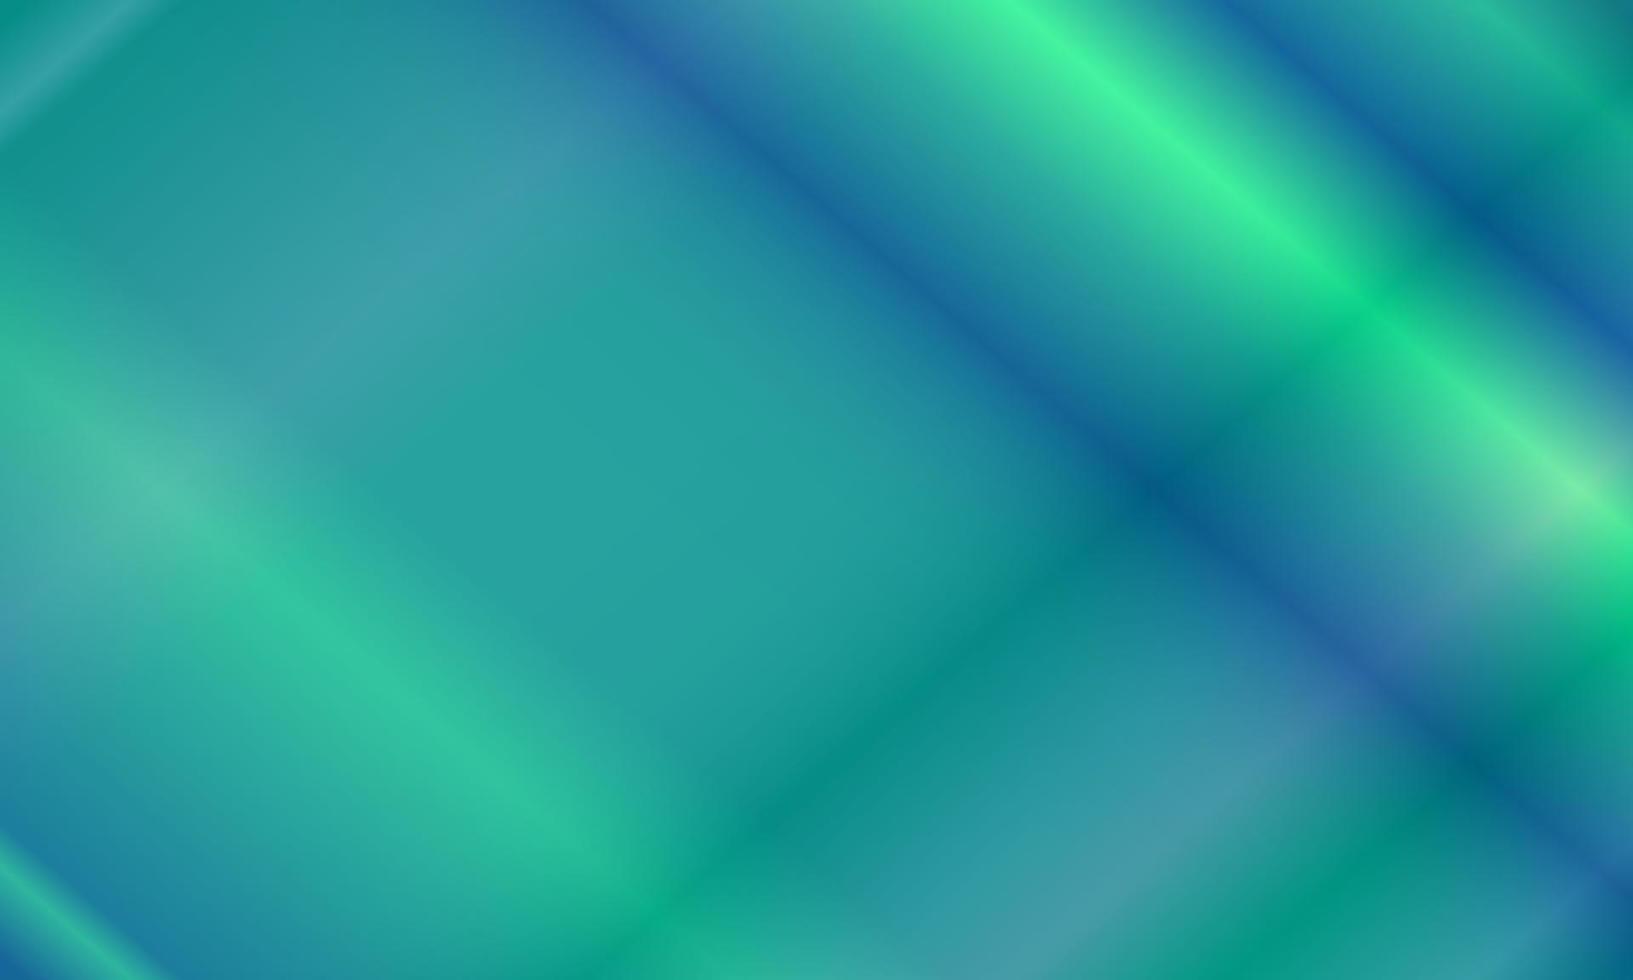 Tosca green and dark blue neon light pattern. abstract, shiny, gradient, blur, modern and colorful style. great for background, backdrop, wallpaper, cover, poster, banner or flyer vector